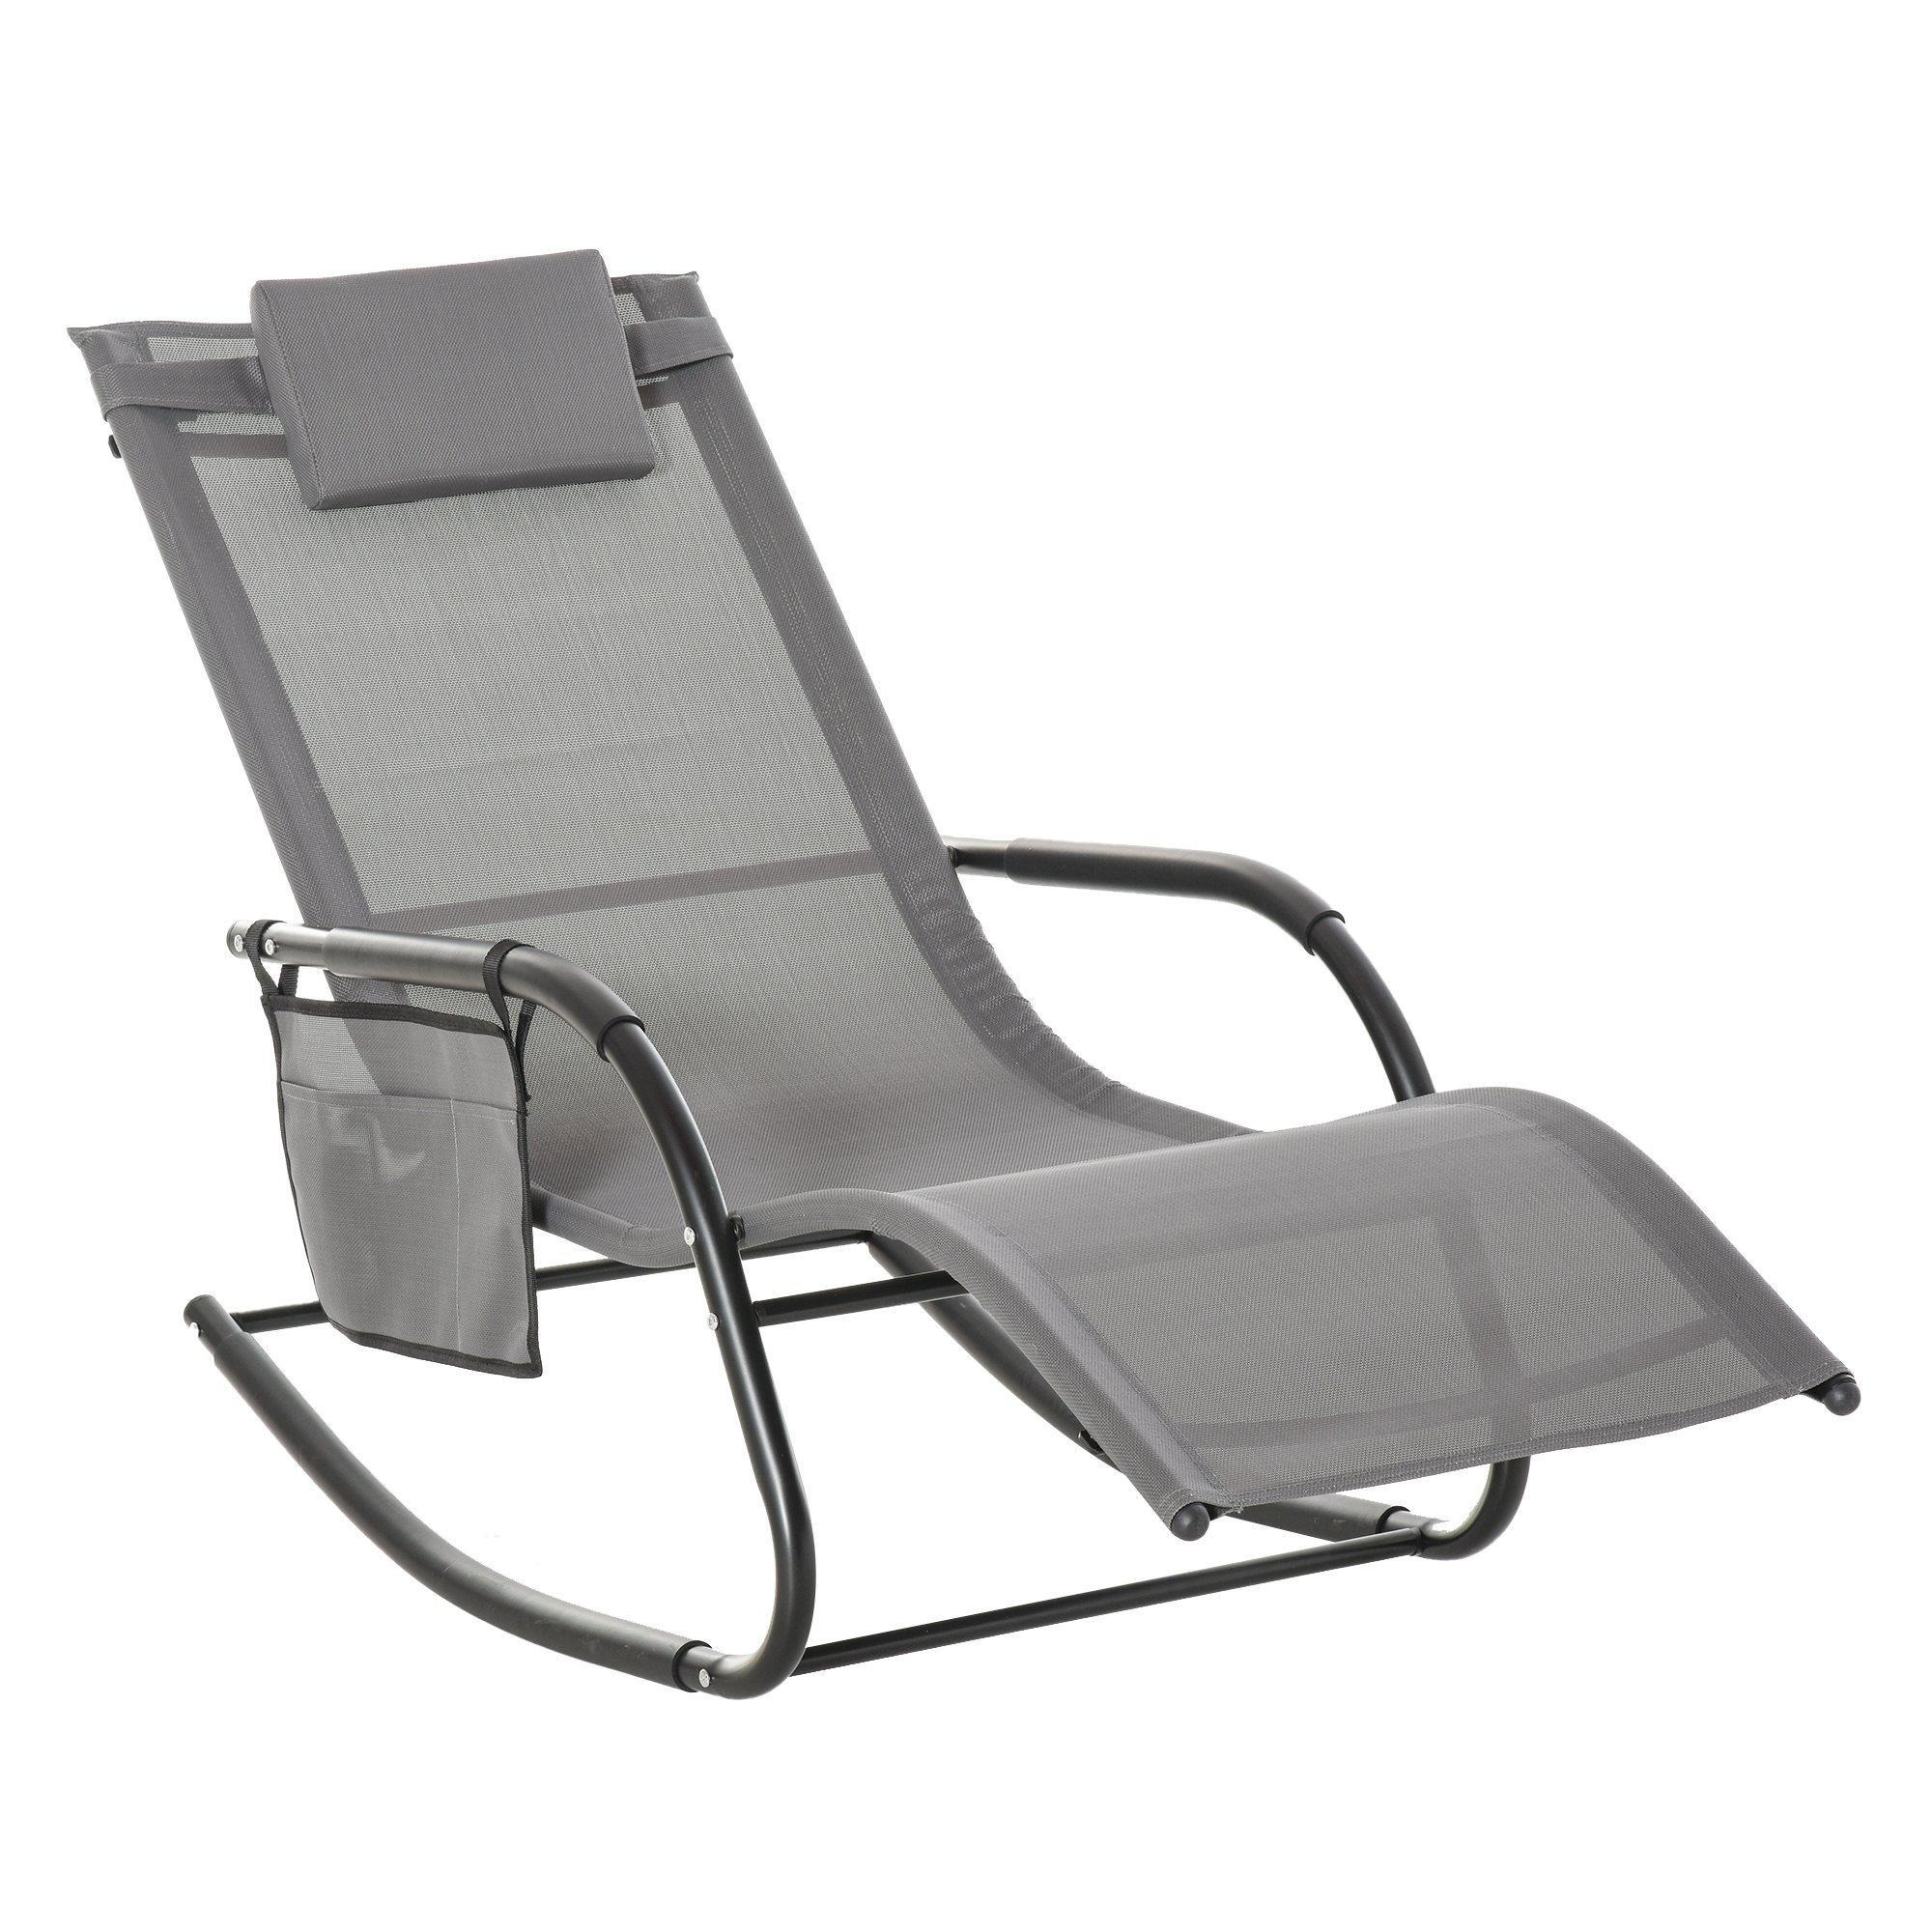 Breathable Mesh Rocking Chair Outdoor Recliner with Headrest - image 1